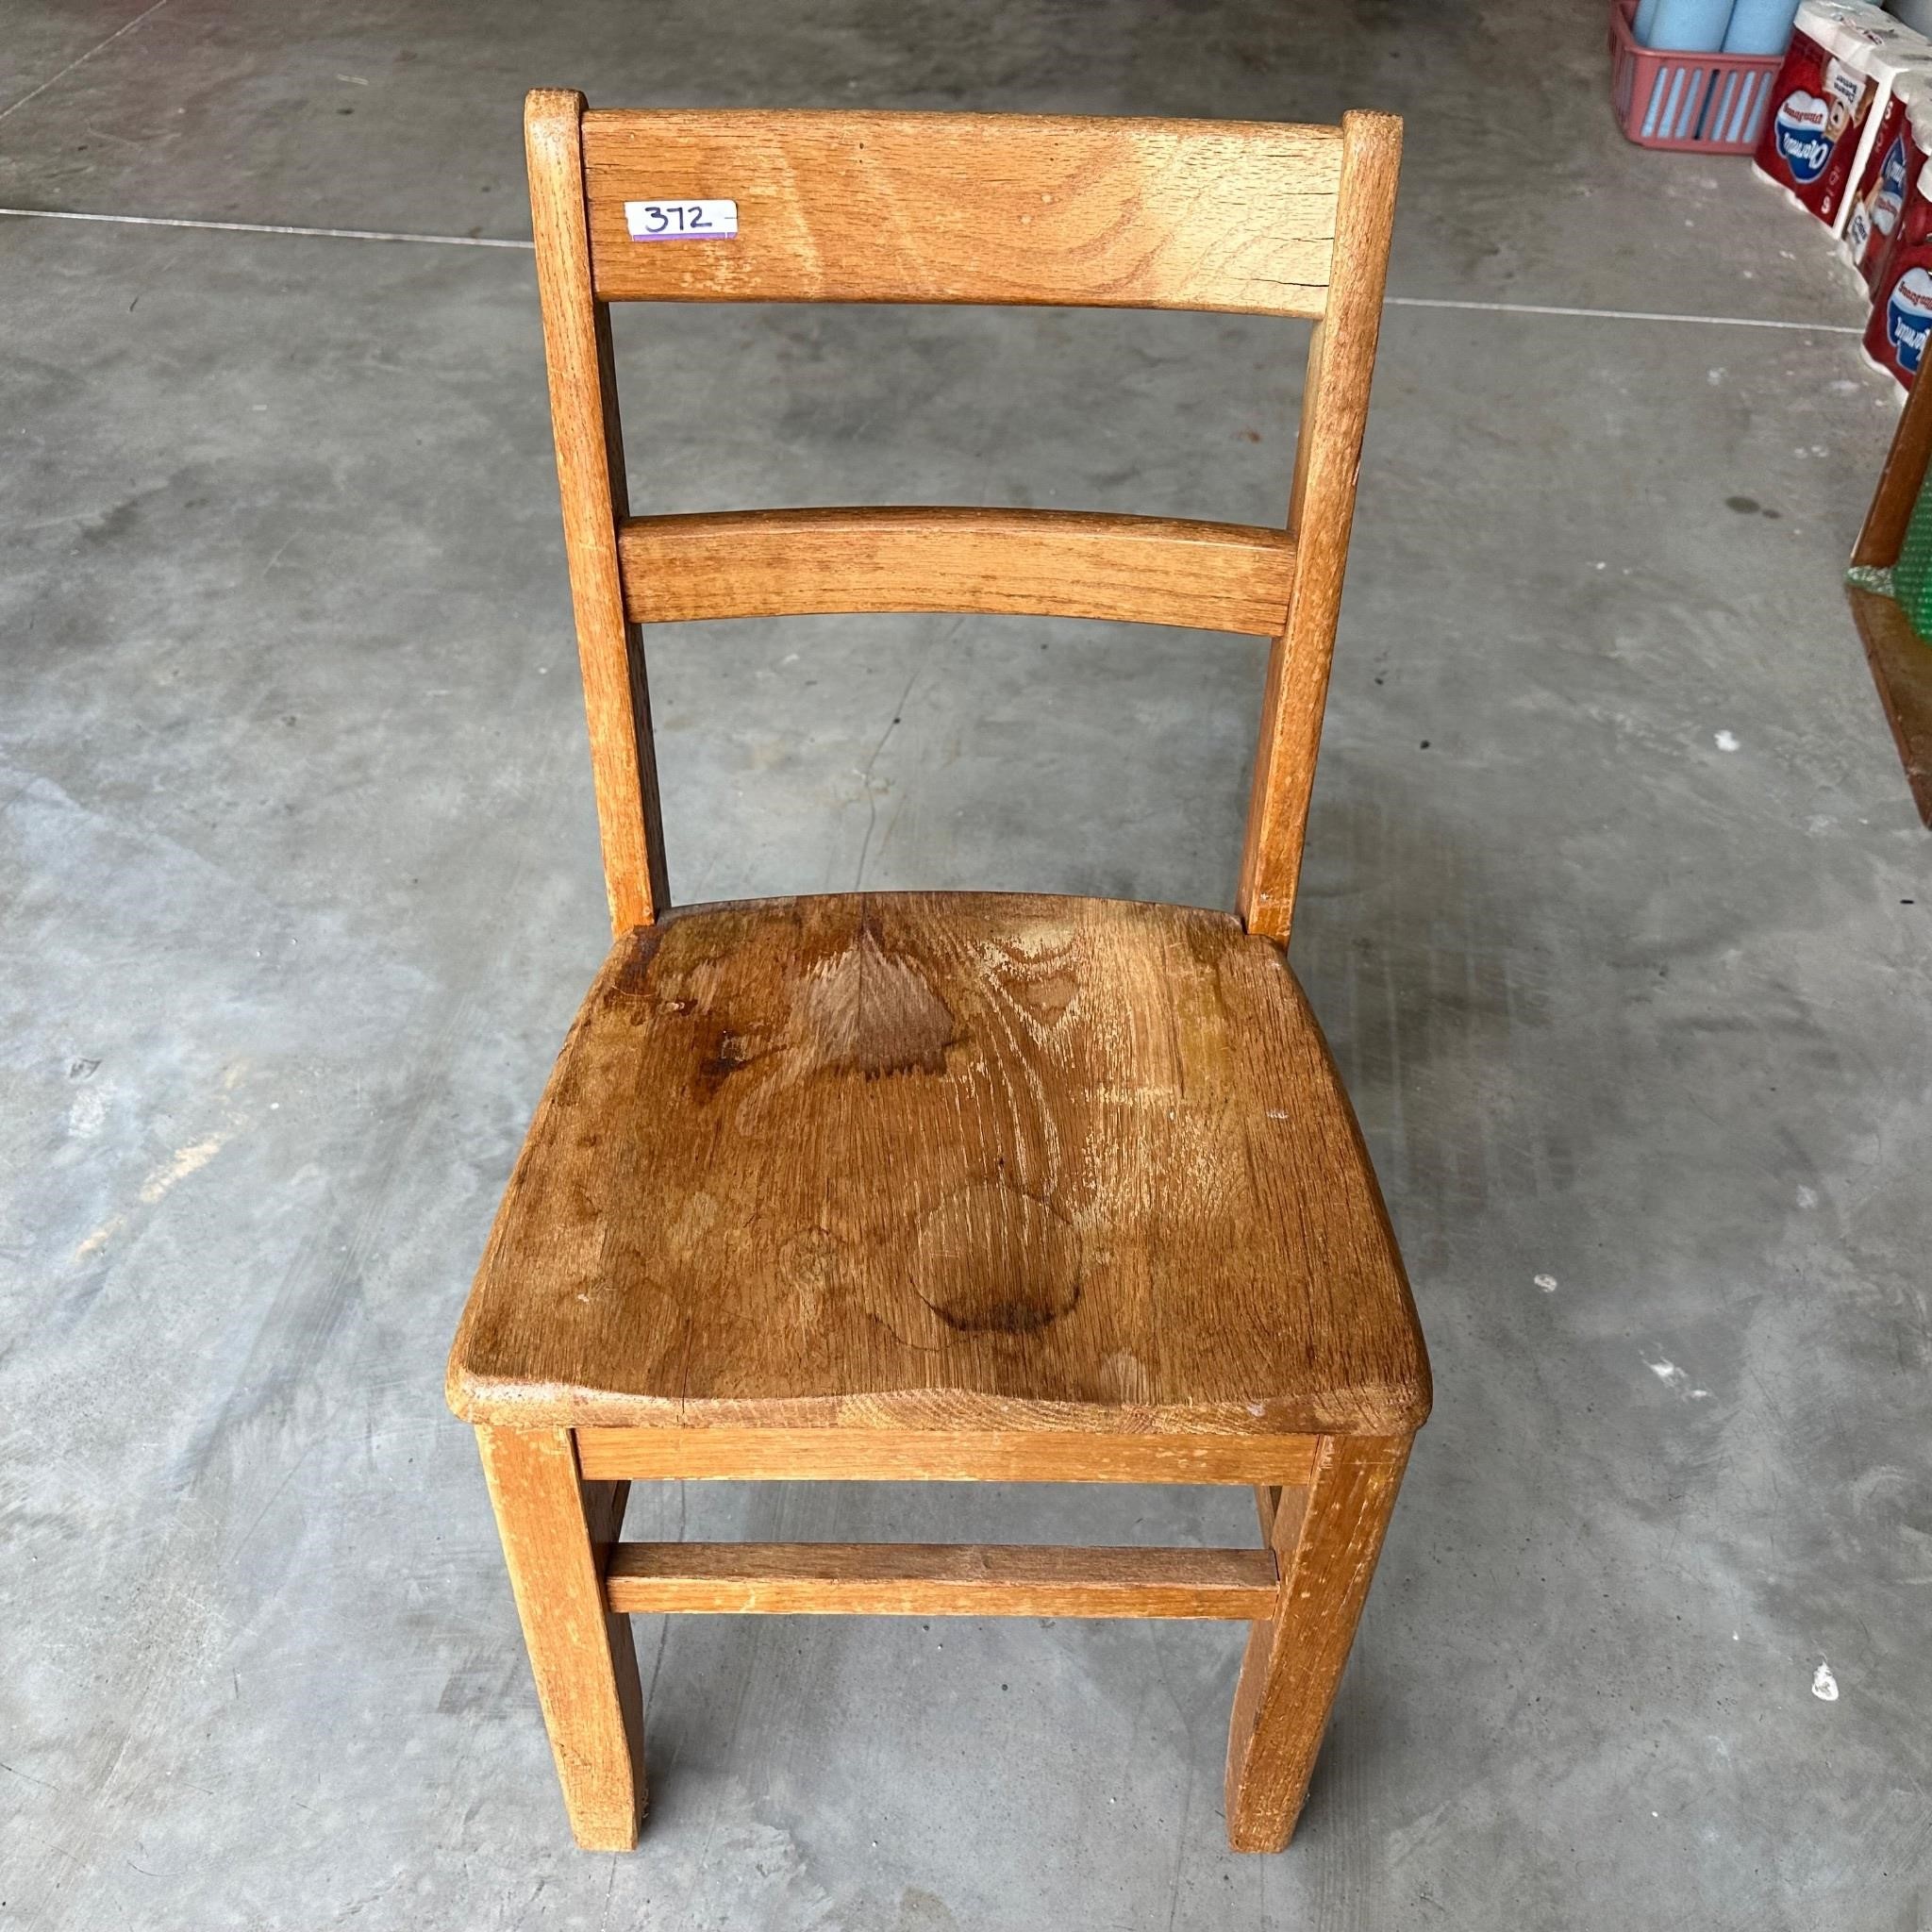 NICE WOODEN CHAIR 1/2